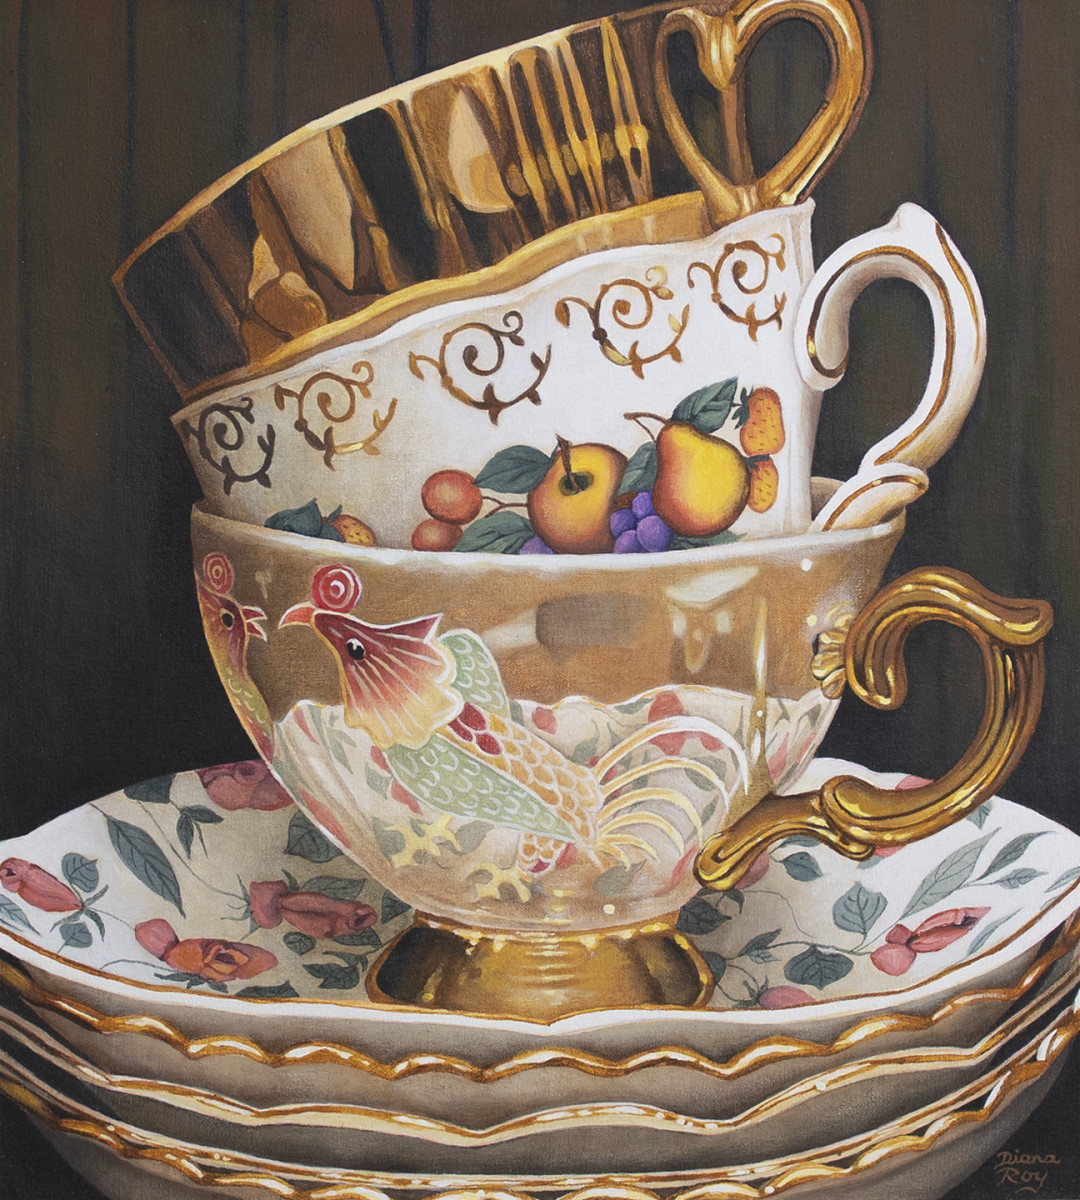 "Three China Cups with Saucers" by Diana Roy 1940-2019 